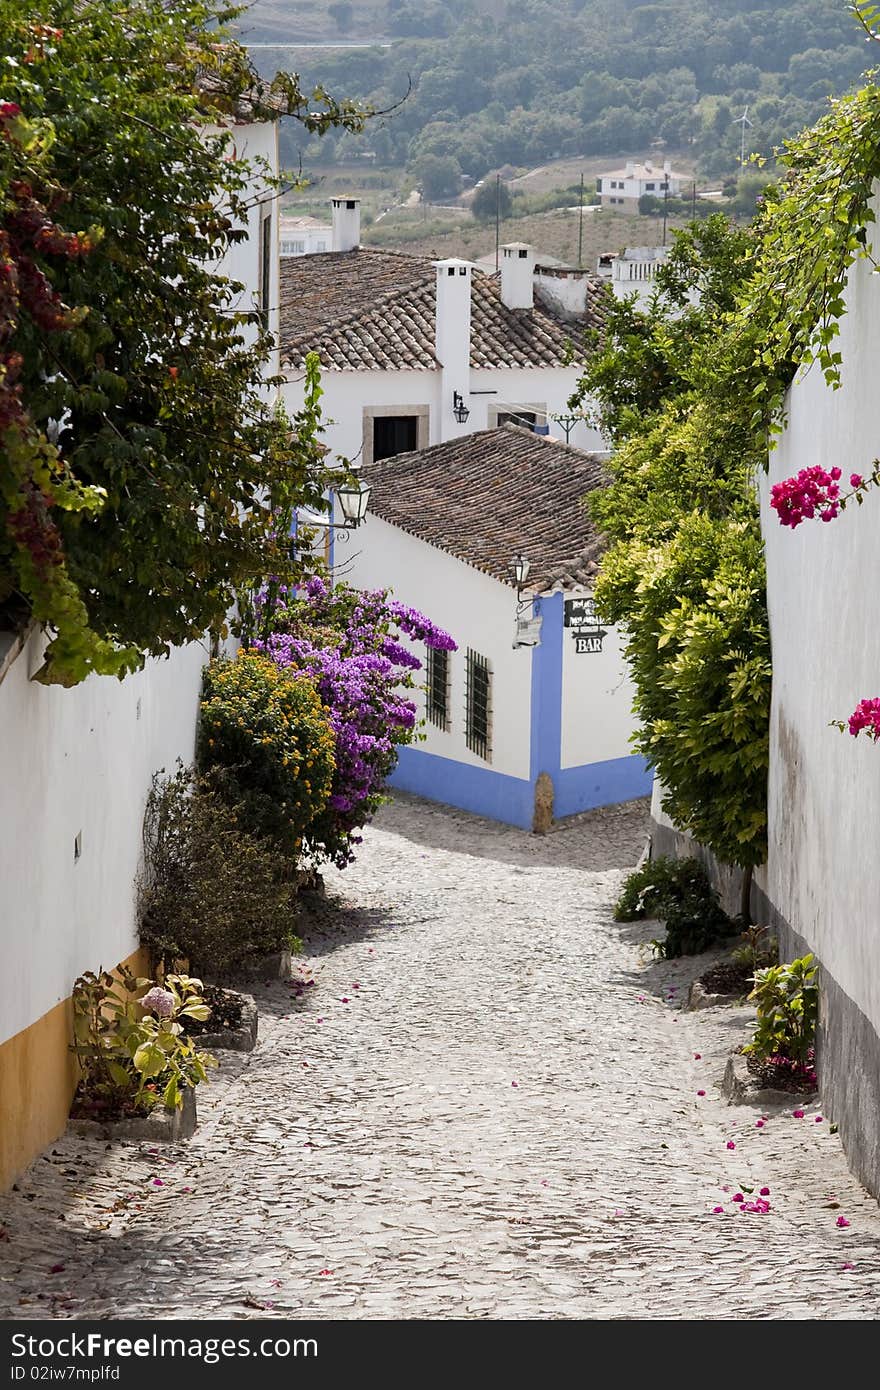 Typical street view of the ancient óbidos village located on Portugal. Typical street view of the ancient óbidos village located on Portugal.